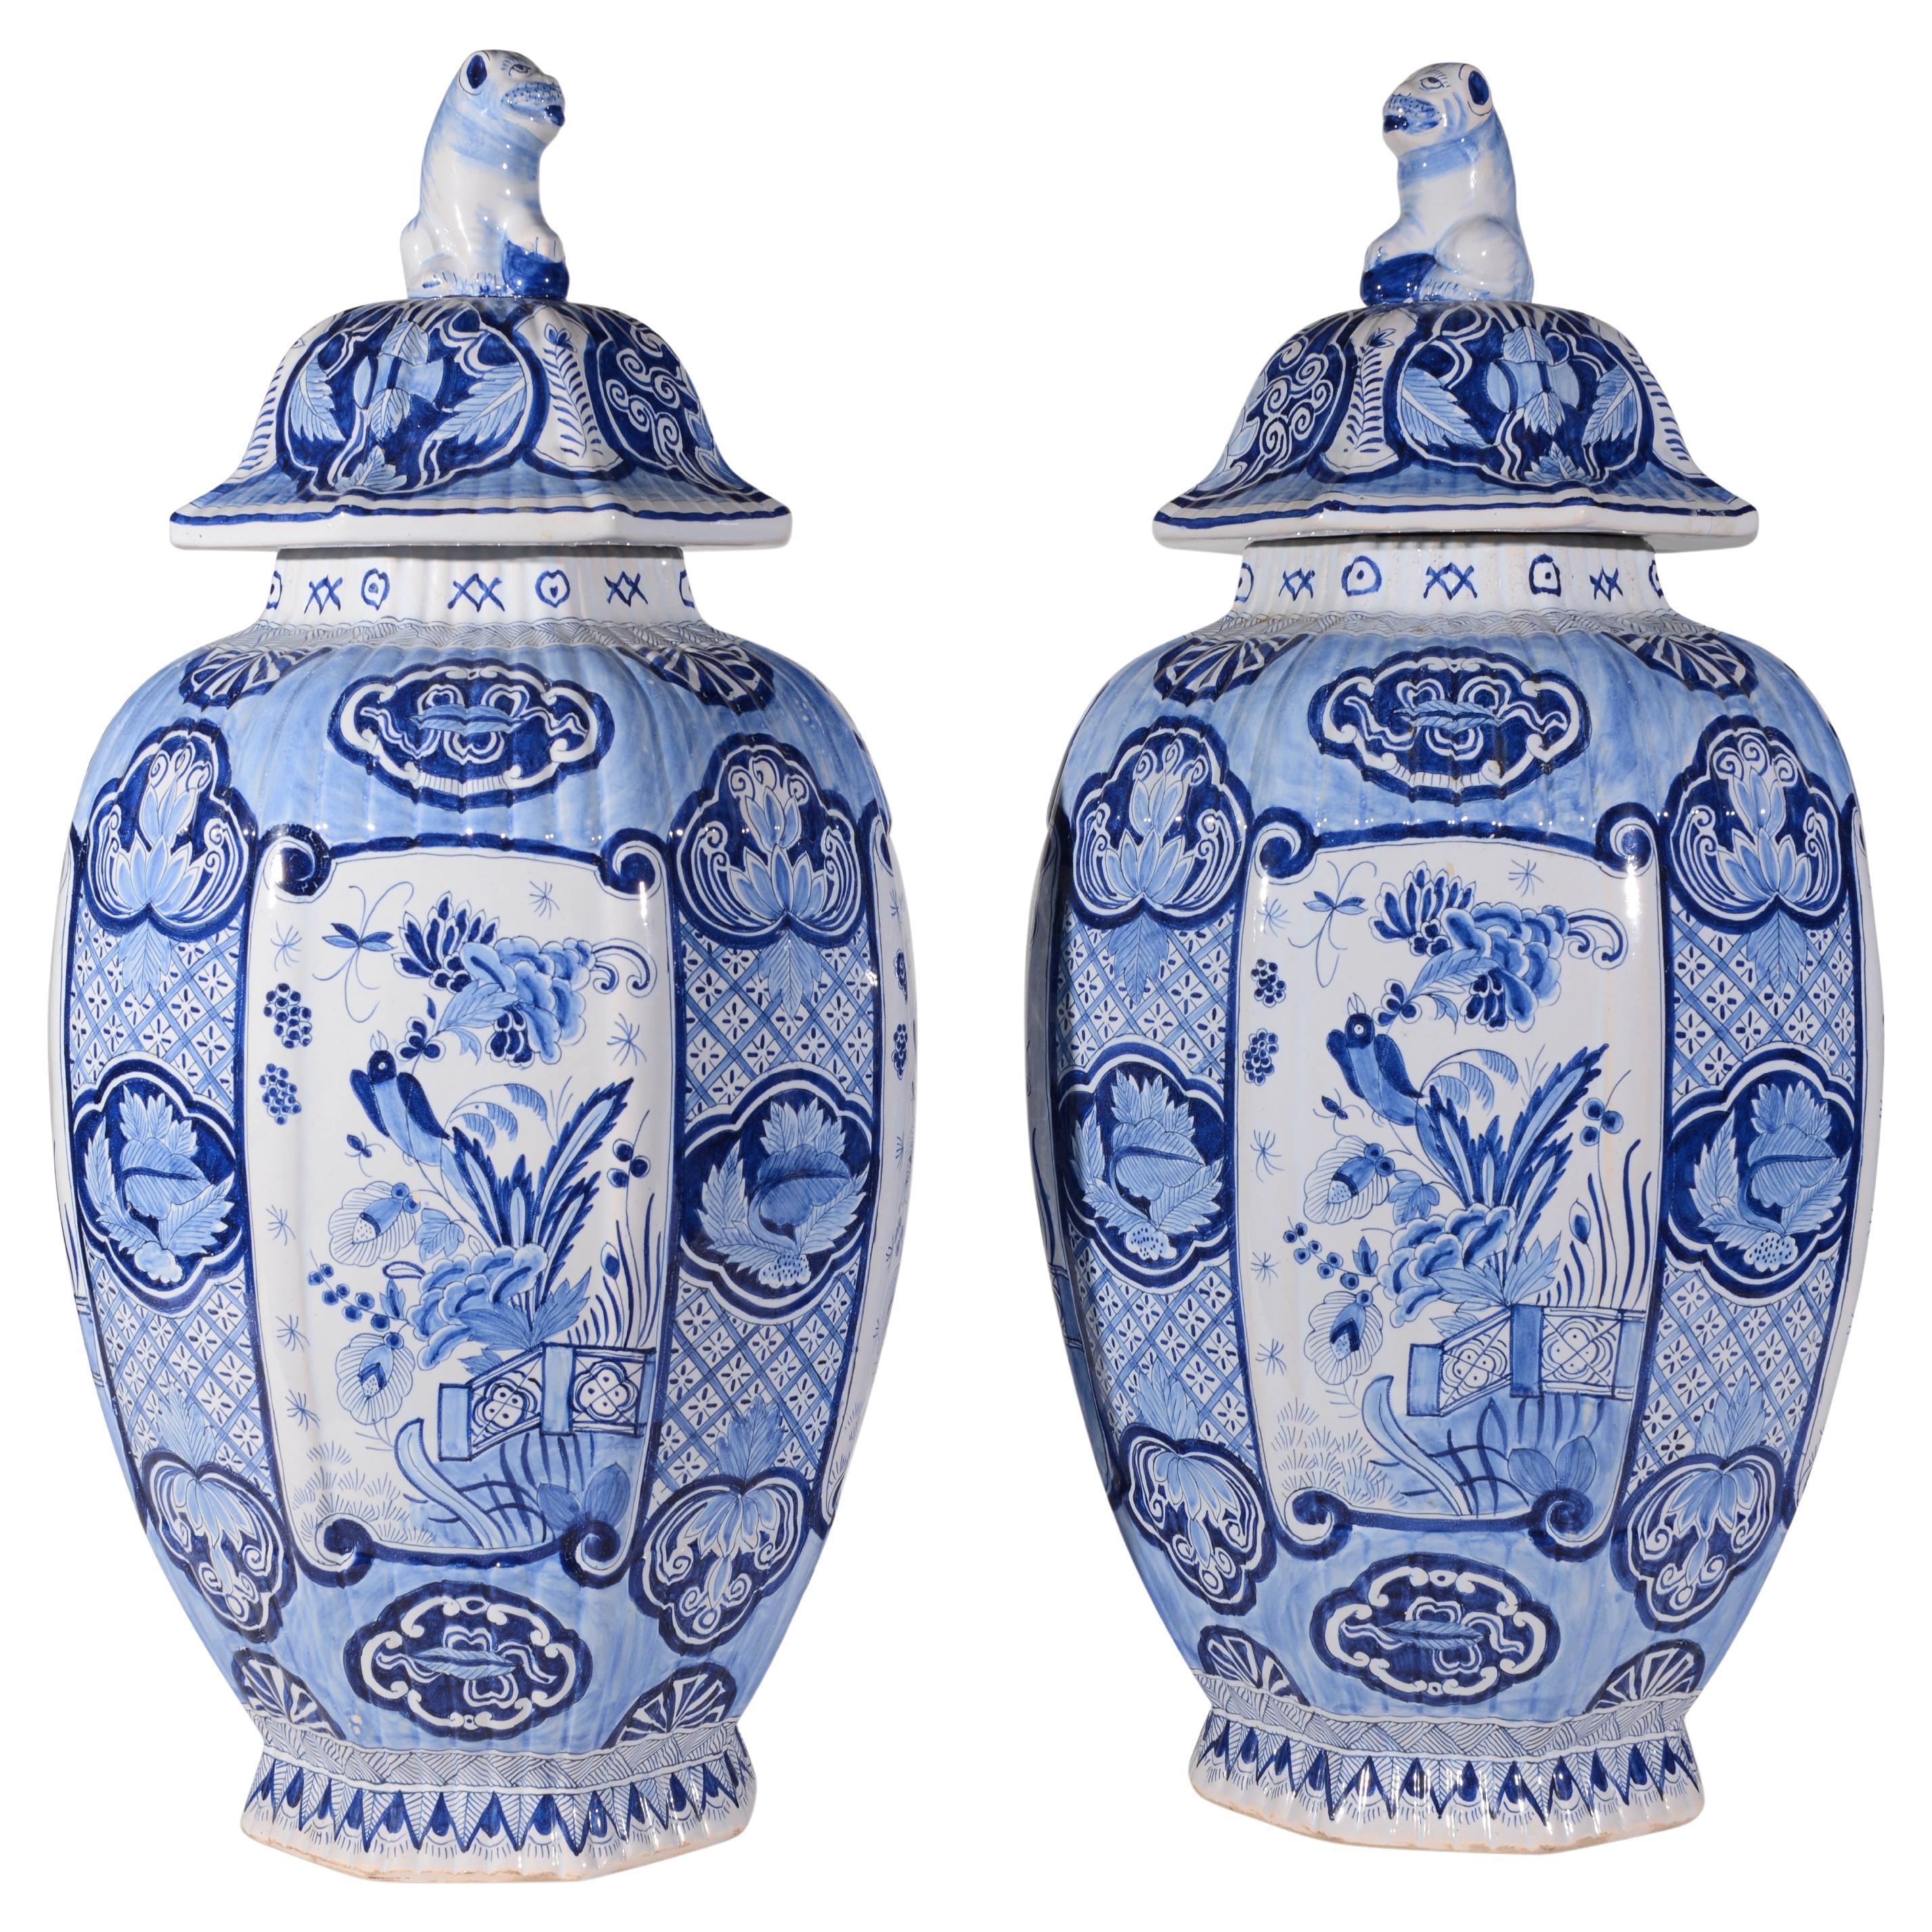 Pair of Blue and White 19th Century Dutch Delft Vases with Covers